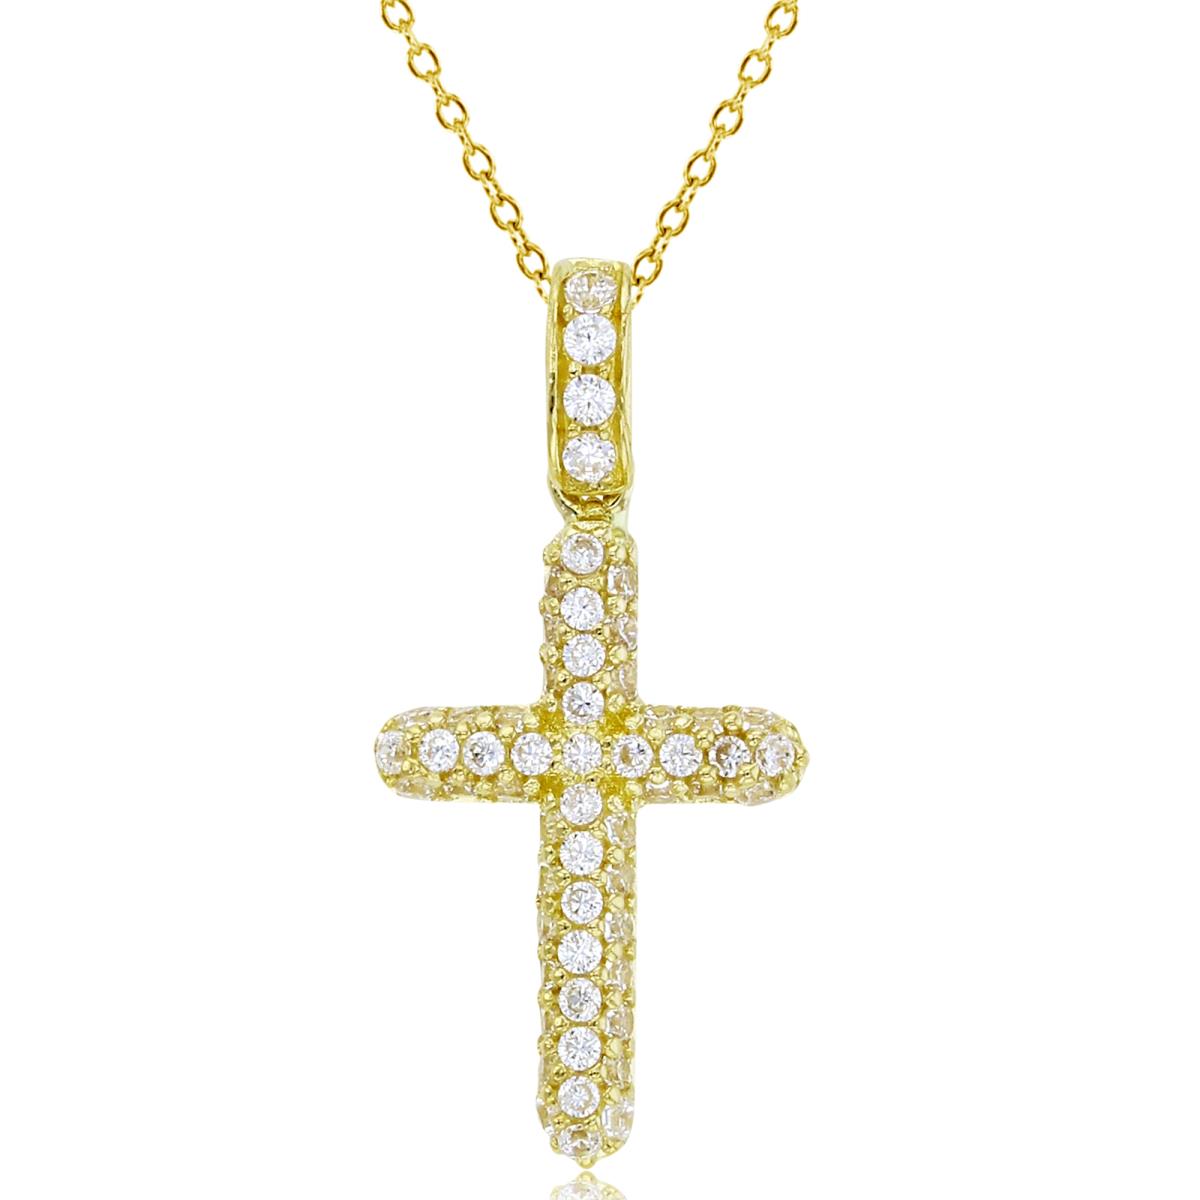 10K Yellow Gold Rnd White CZ Puffy Cross 18"Necklace